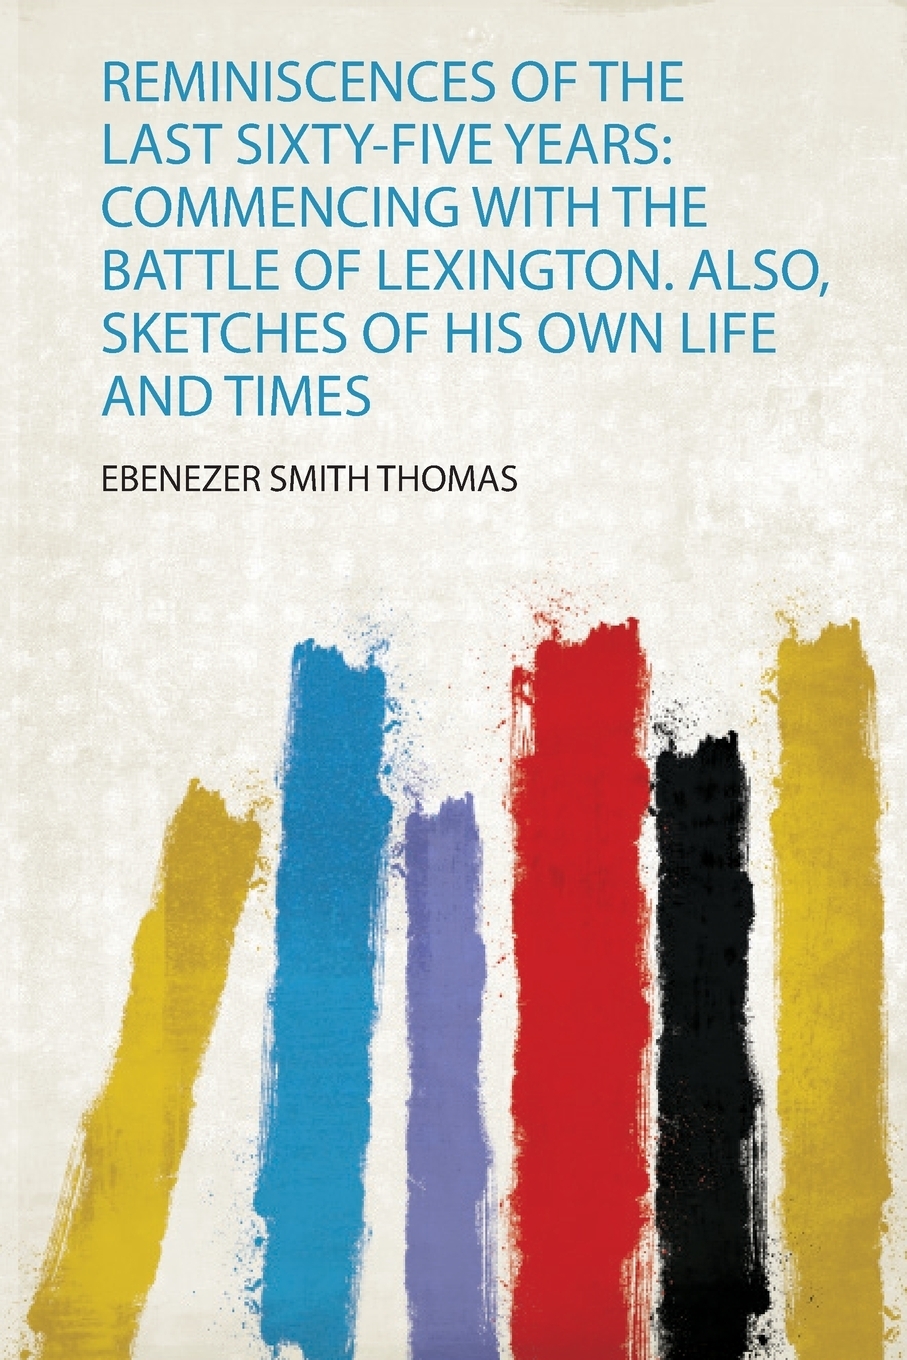 Reminiscences of the Last Sixty-Five Years. Commencing With the Battle of Lexington. Also, Sketches of His Own Life and Times